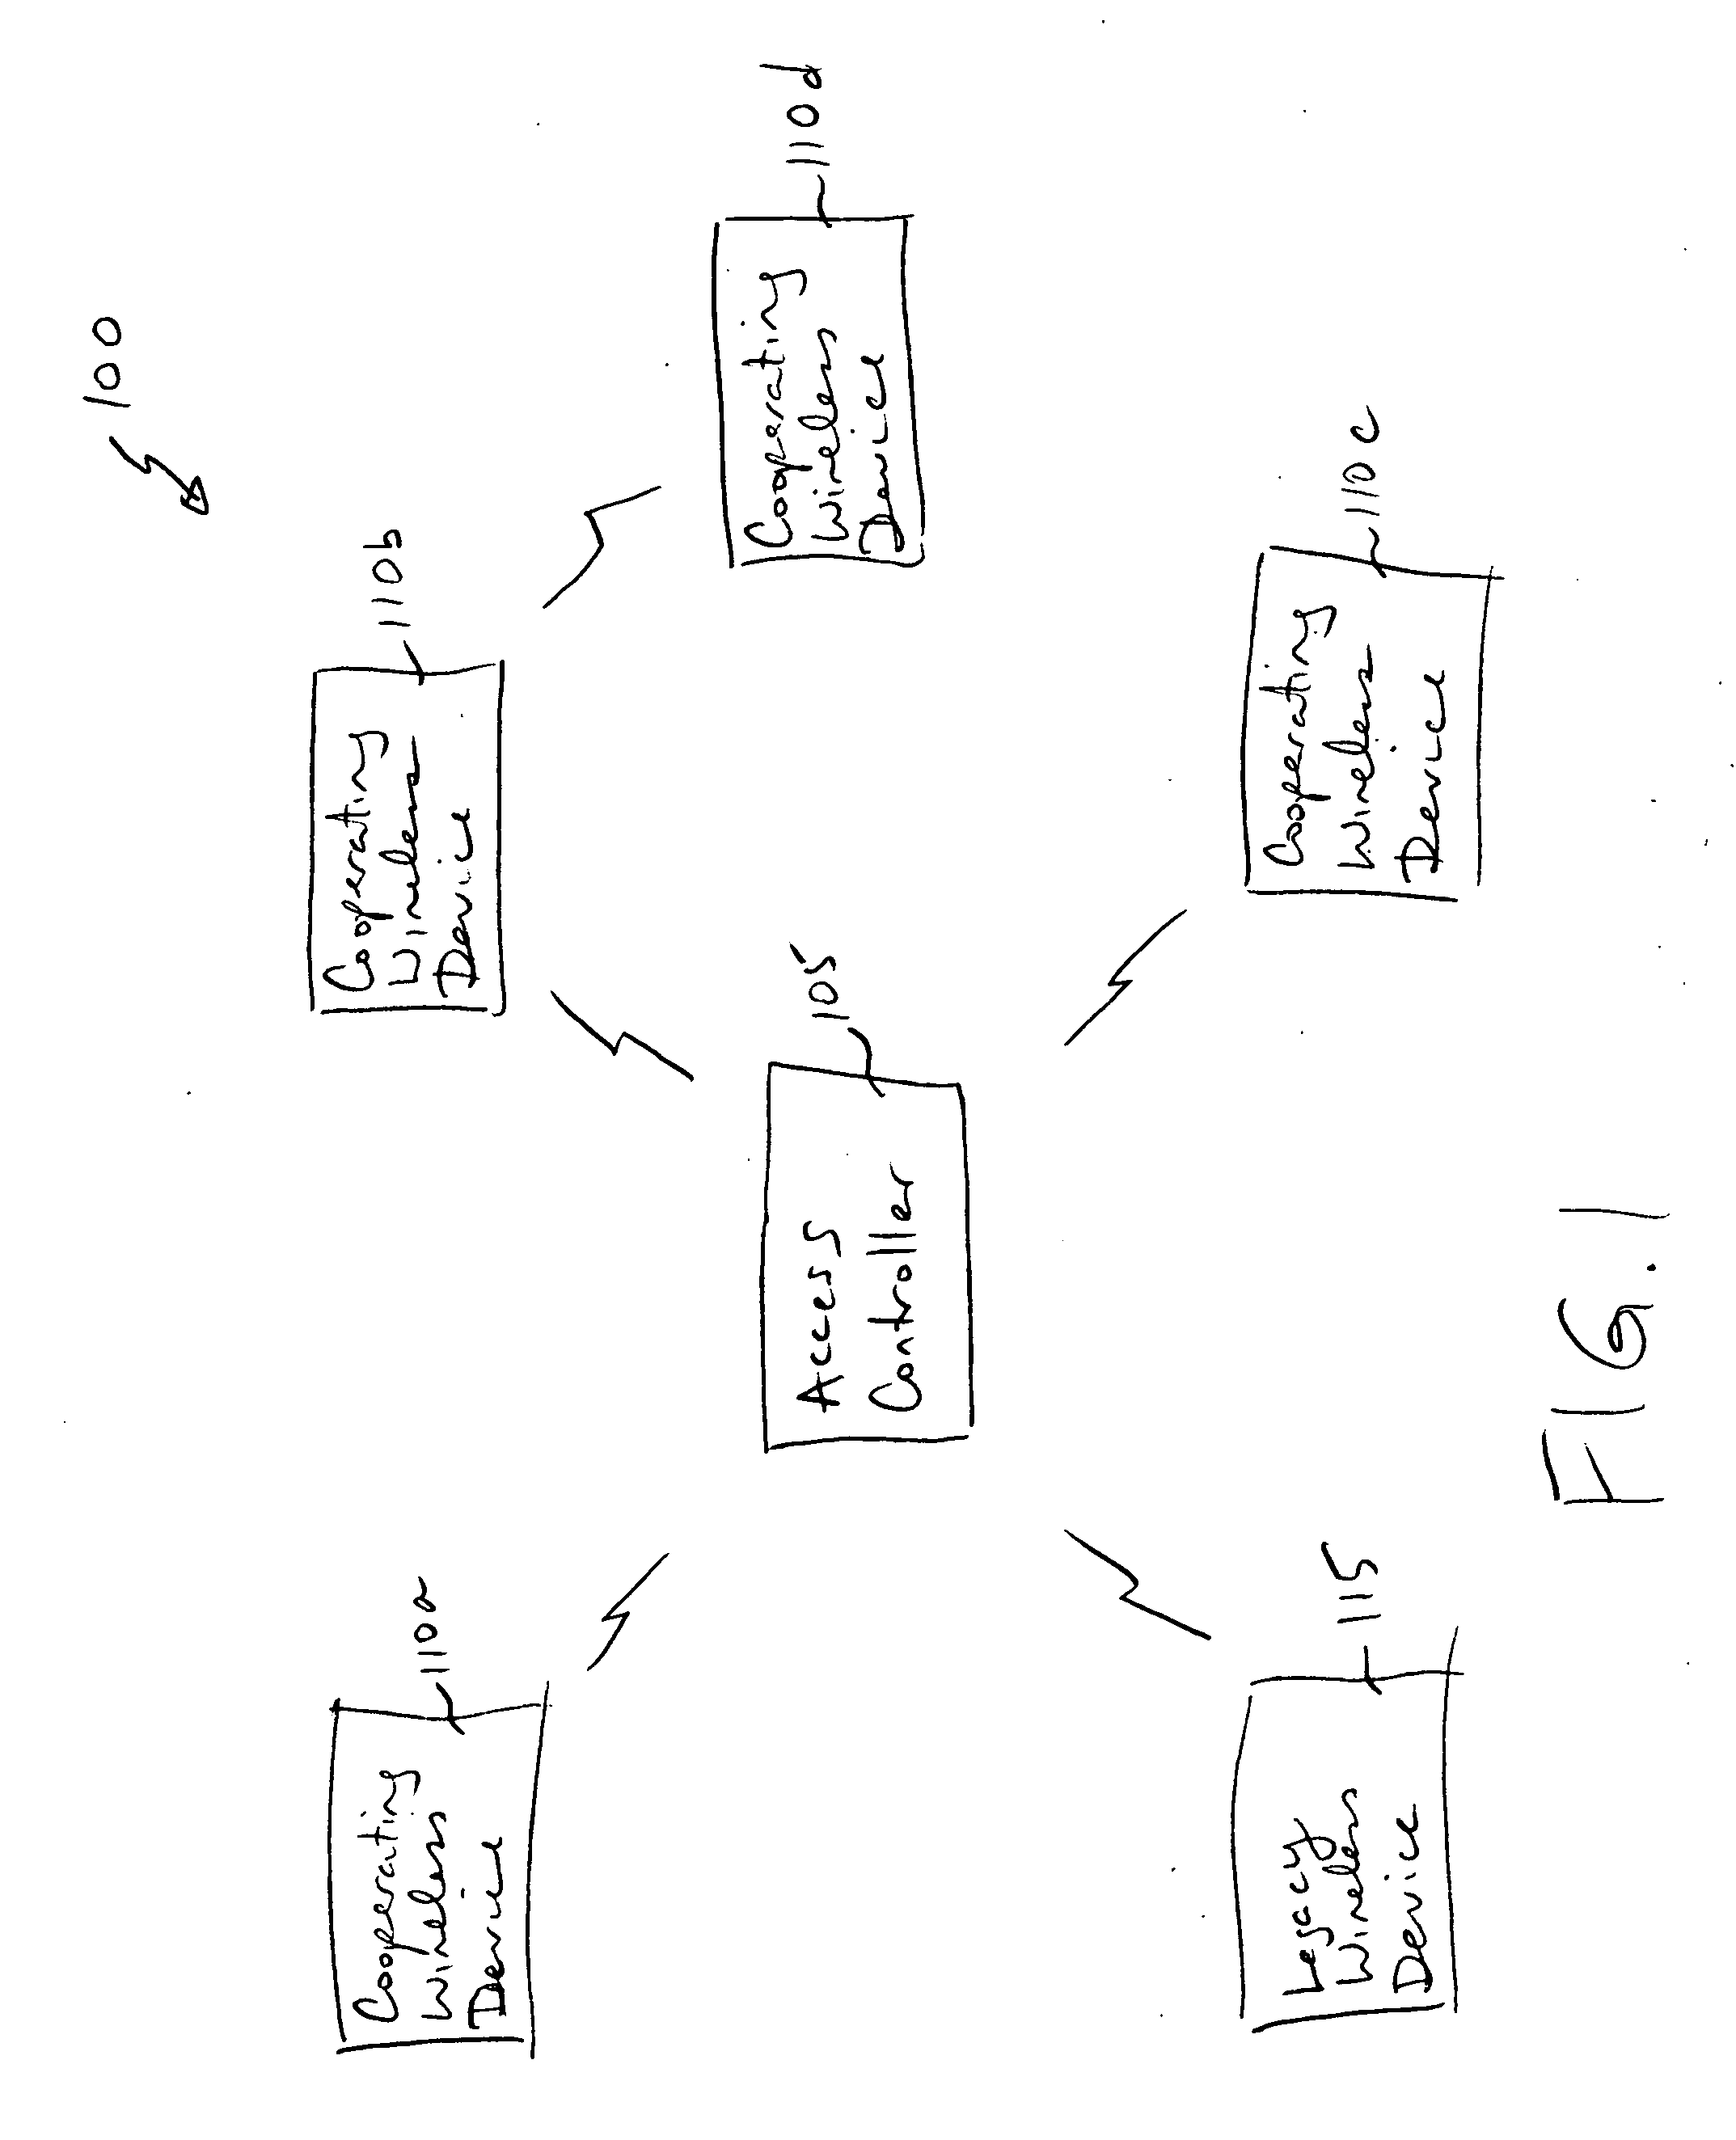 System and method for providing efficient spectrum usage of wireless devices in unlicensed bands